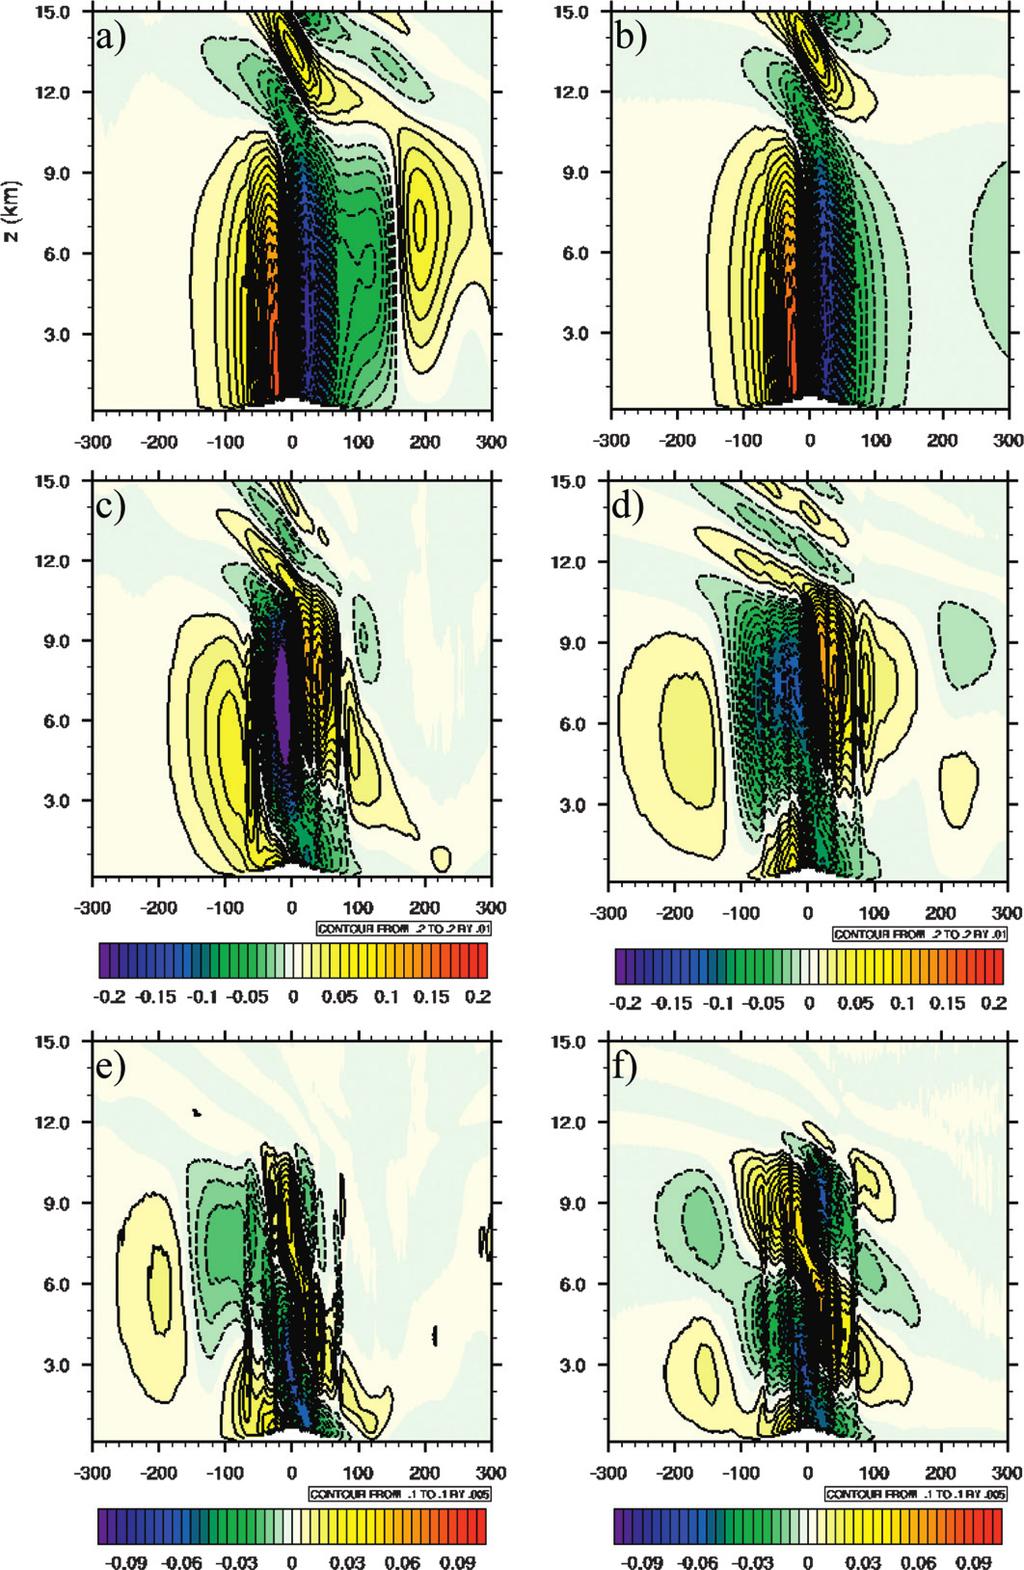 3072 JOURNAL OF THE ATMOSPHERIC SCIENCES FIG. 11. Vertical velocity contours from dry troposphere stratosphere WRF simulations described in Steiner et al. (2005).